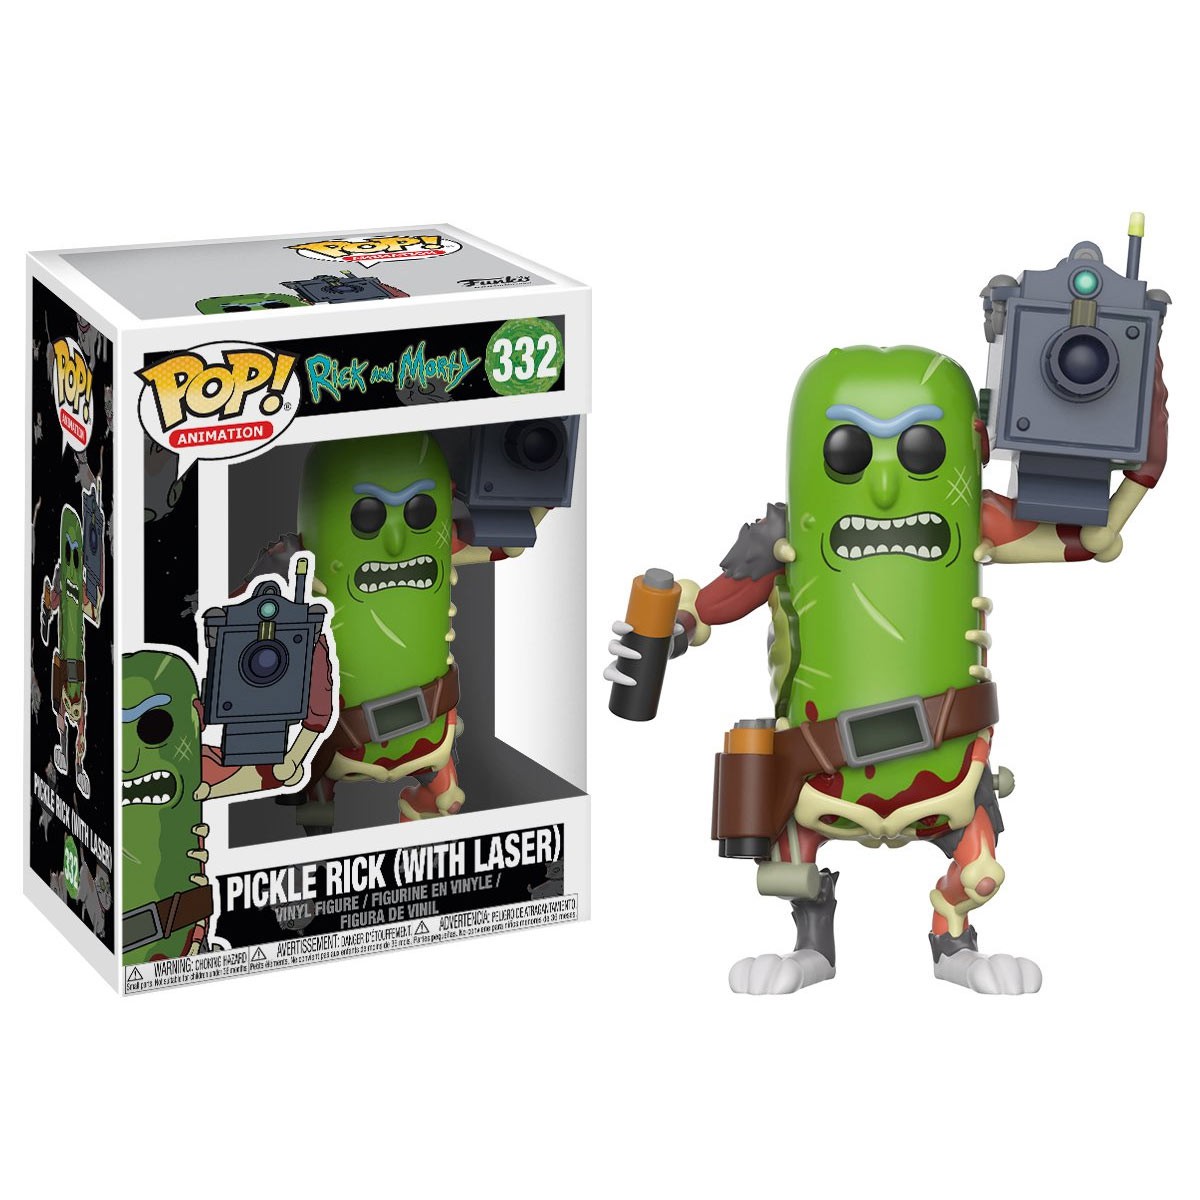 Rick and Morty Pickle Rick with Lasers Funko Pop Vinyl Figure